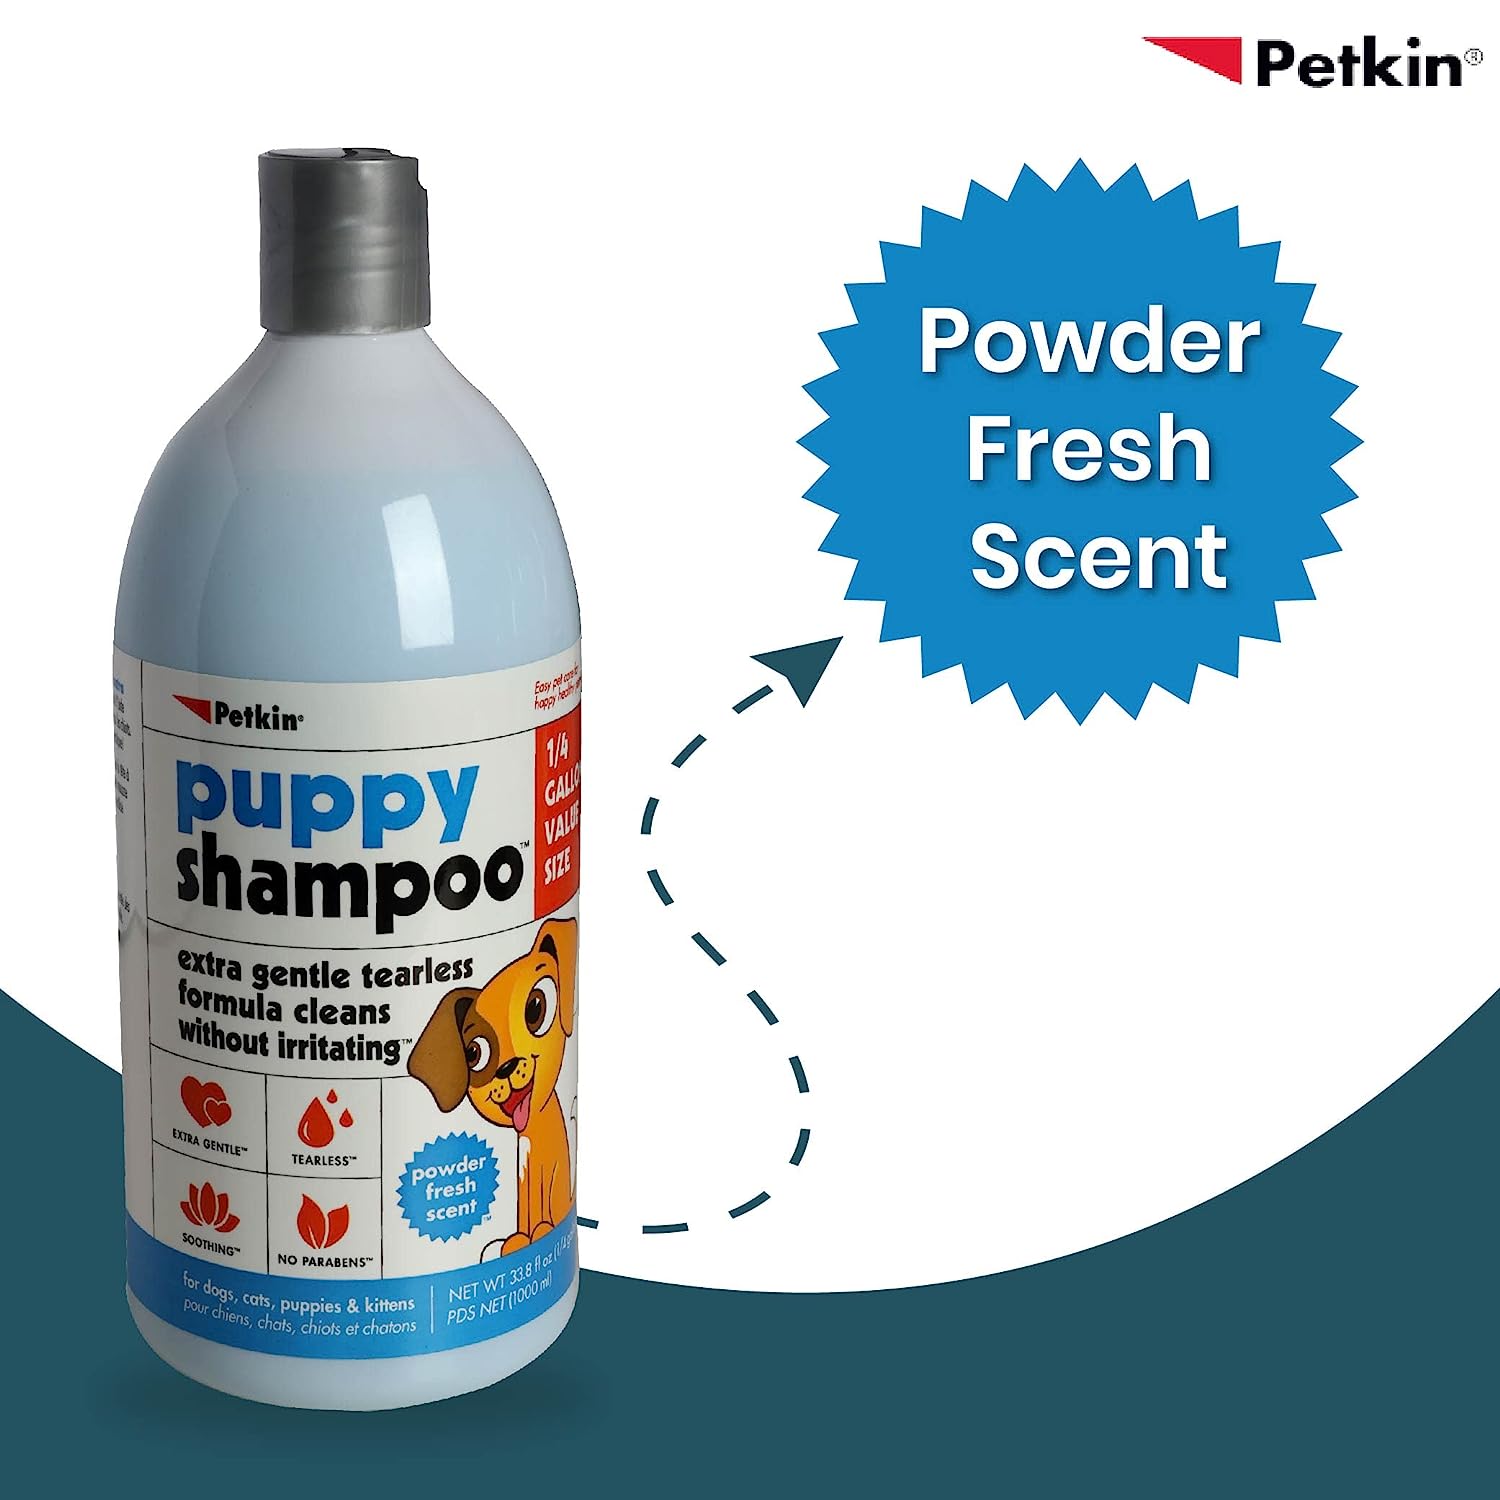 Petkin Puppy Shampoo Cleans Your Pet with an Extra Gentle and Tearless Formula Designed Especially for Puppies. Leaves Coat Soft, Smelling Powder Fresh and Feeling Great - 1000ml…